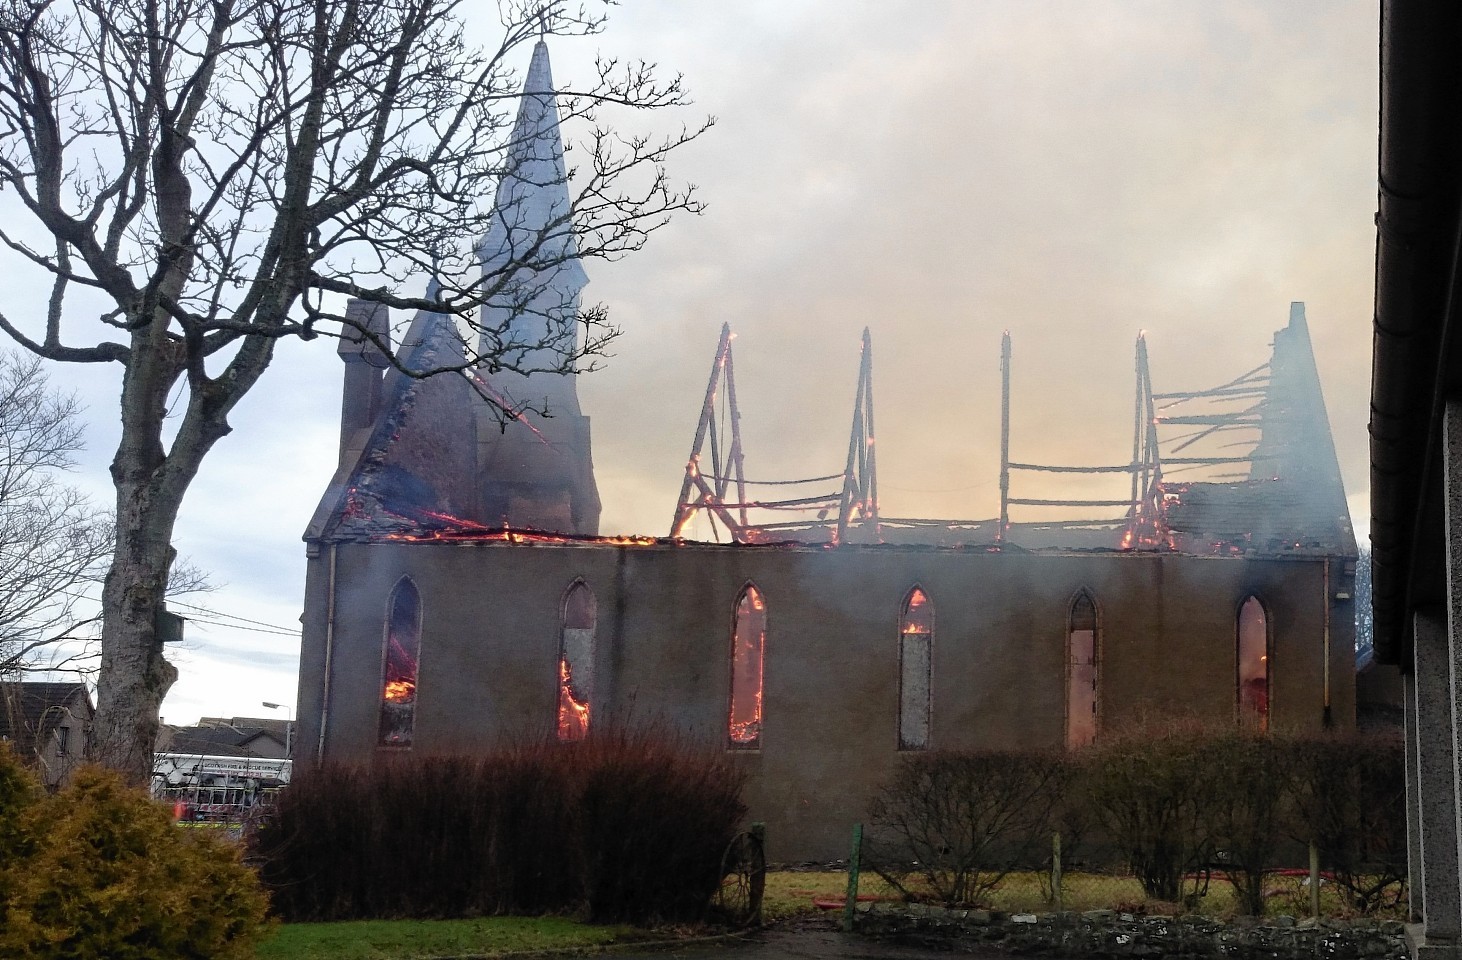 A fire at the disused West Church on Main Street in Hatton, Abderdeenshire. 35 fire fighters attended the blaze that started in the early morning. 